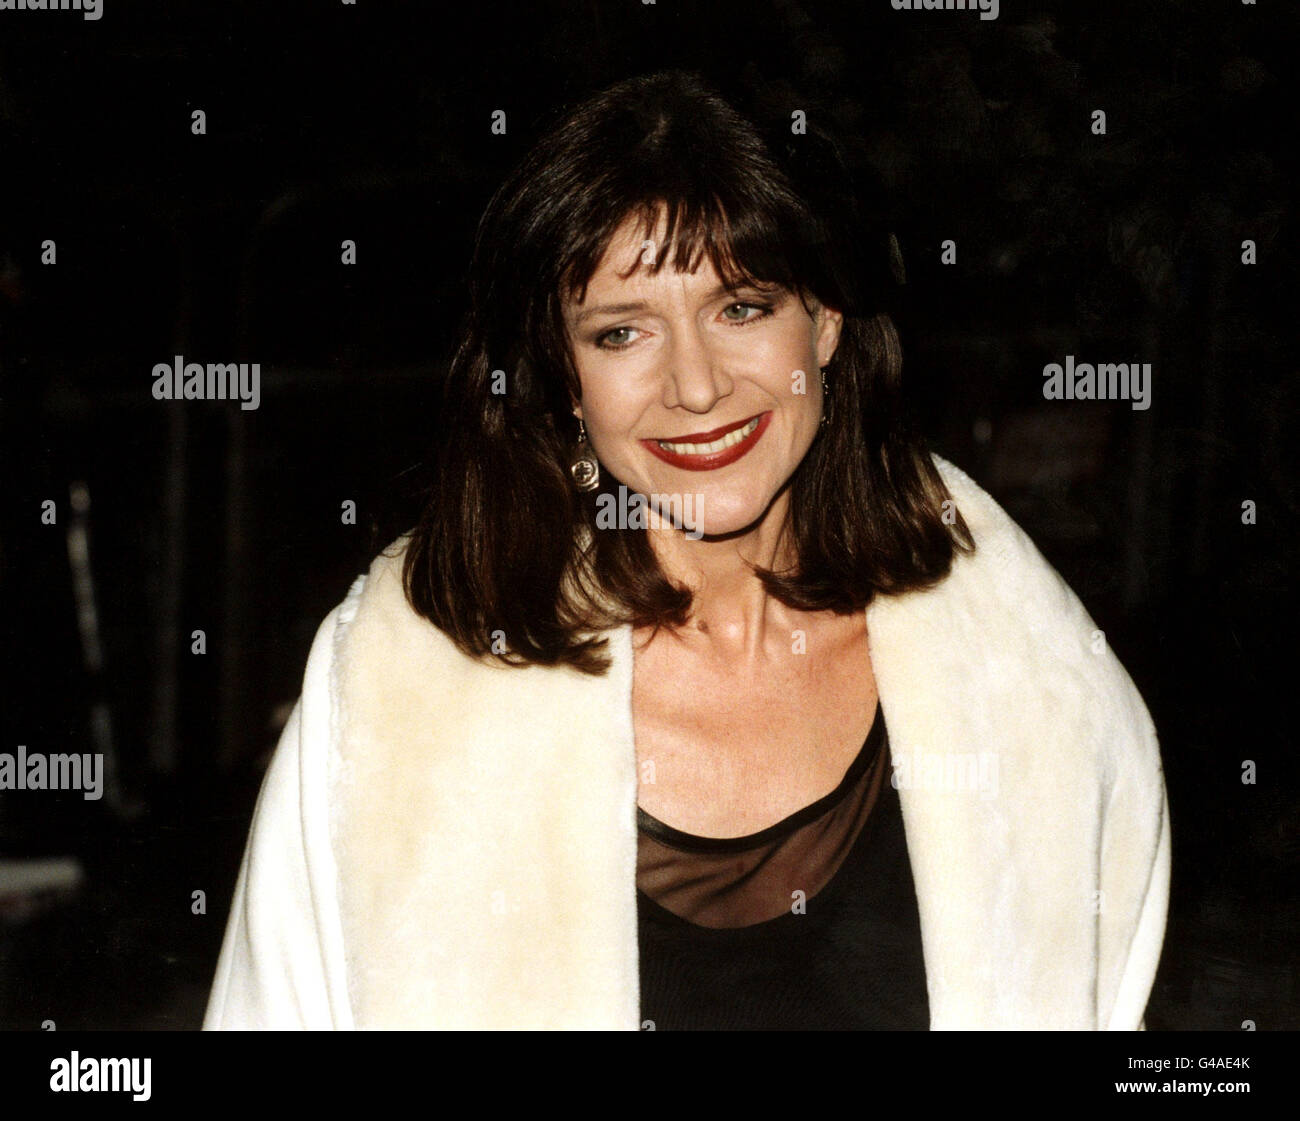 PA NEWS PHOTO 15/1/98 ACTRESS BELINDA LANG AT THE PARK LANE HOTEL, LONDON AHEAD OF THE GALA REVUE IN CELEBRATION OF THE FORTHCOMING ALBUM 'TWENTIETH CENTURY BLUES - THE SONGS OF NOEL COWARD' WHICH WILL BE RELEASED THROUGH EMI RECORDS. Stock Photo